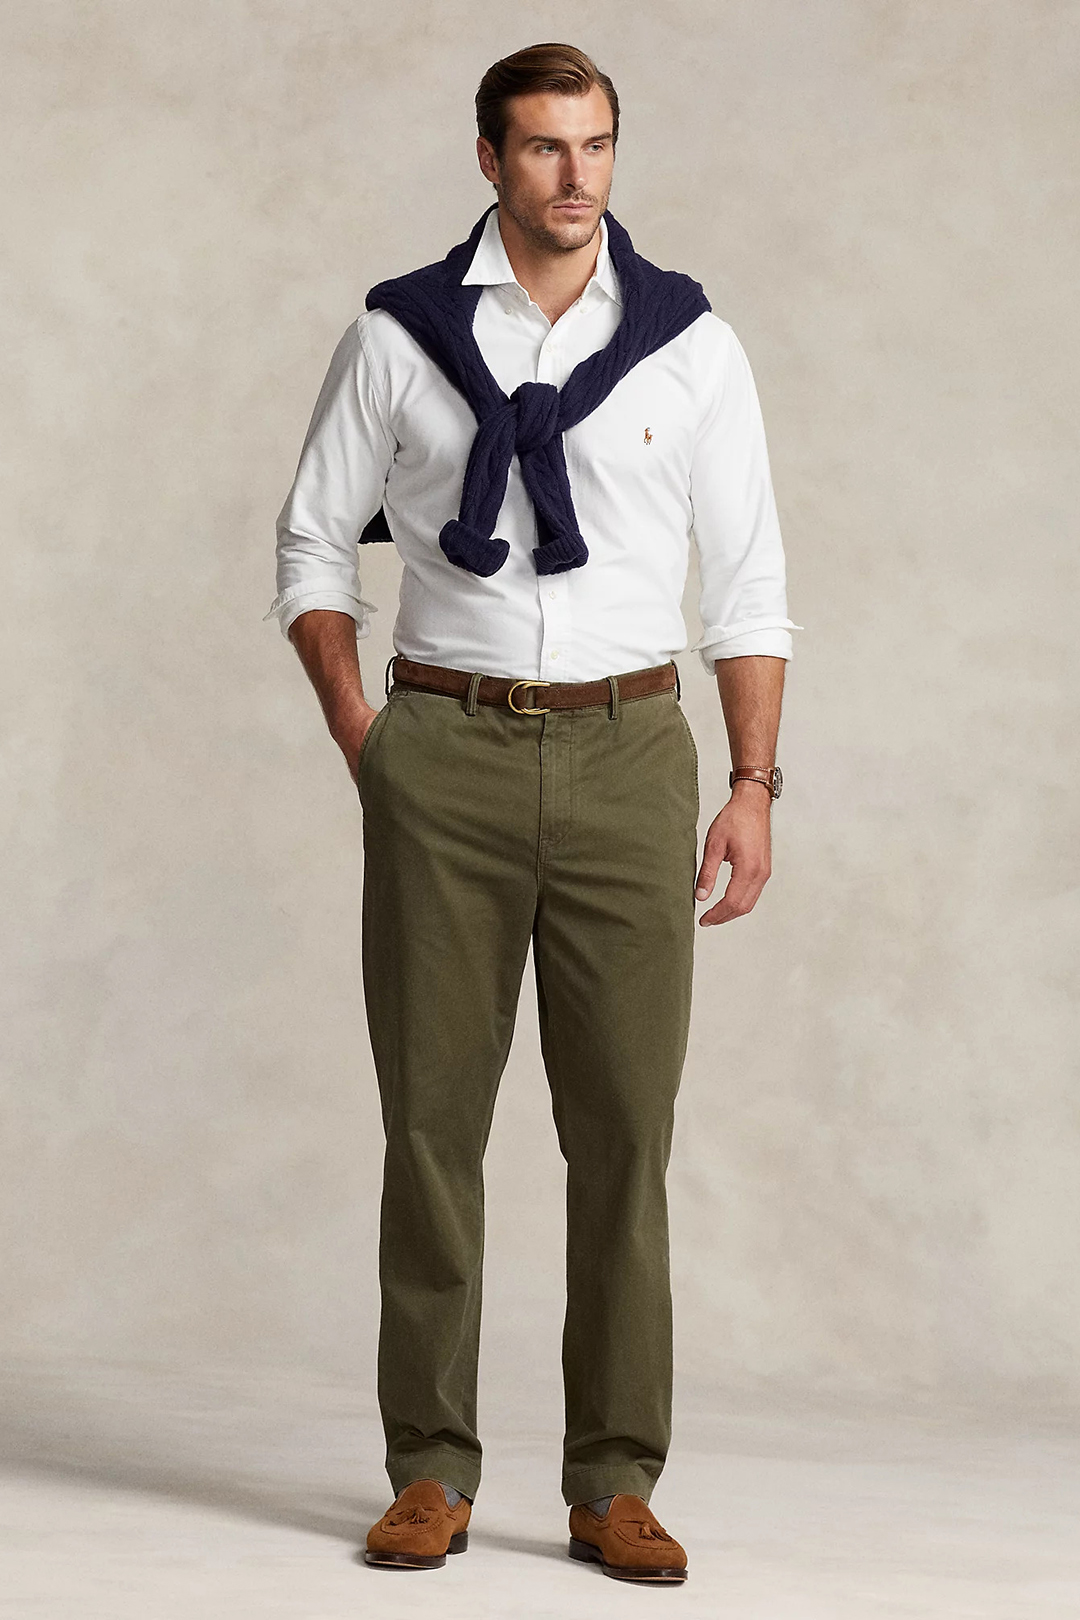 White dress shirt, navy sweater draped over shoulders, olive green chinos, and brown suede loafers outfit